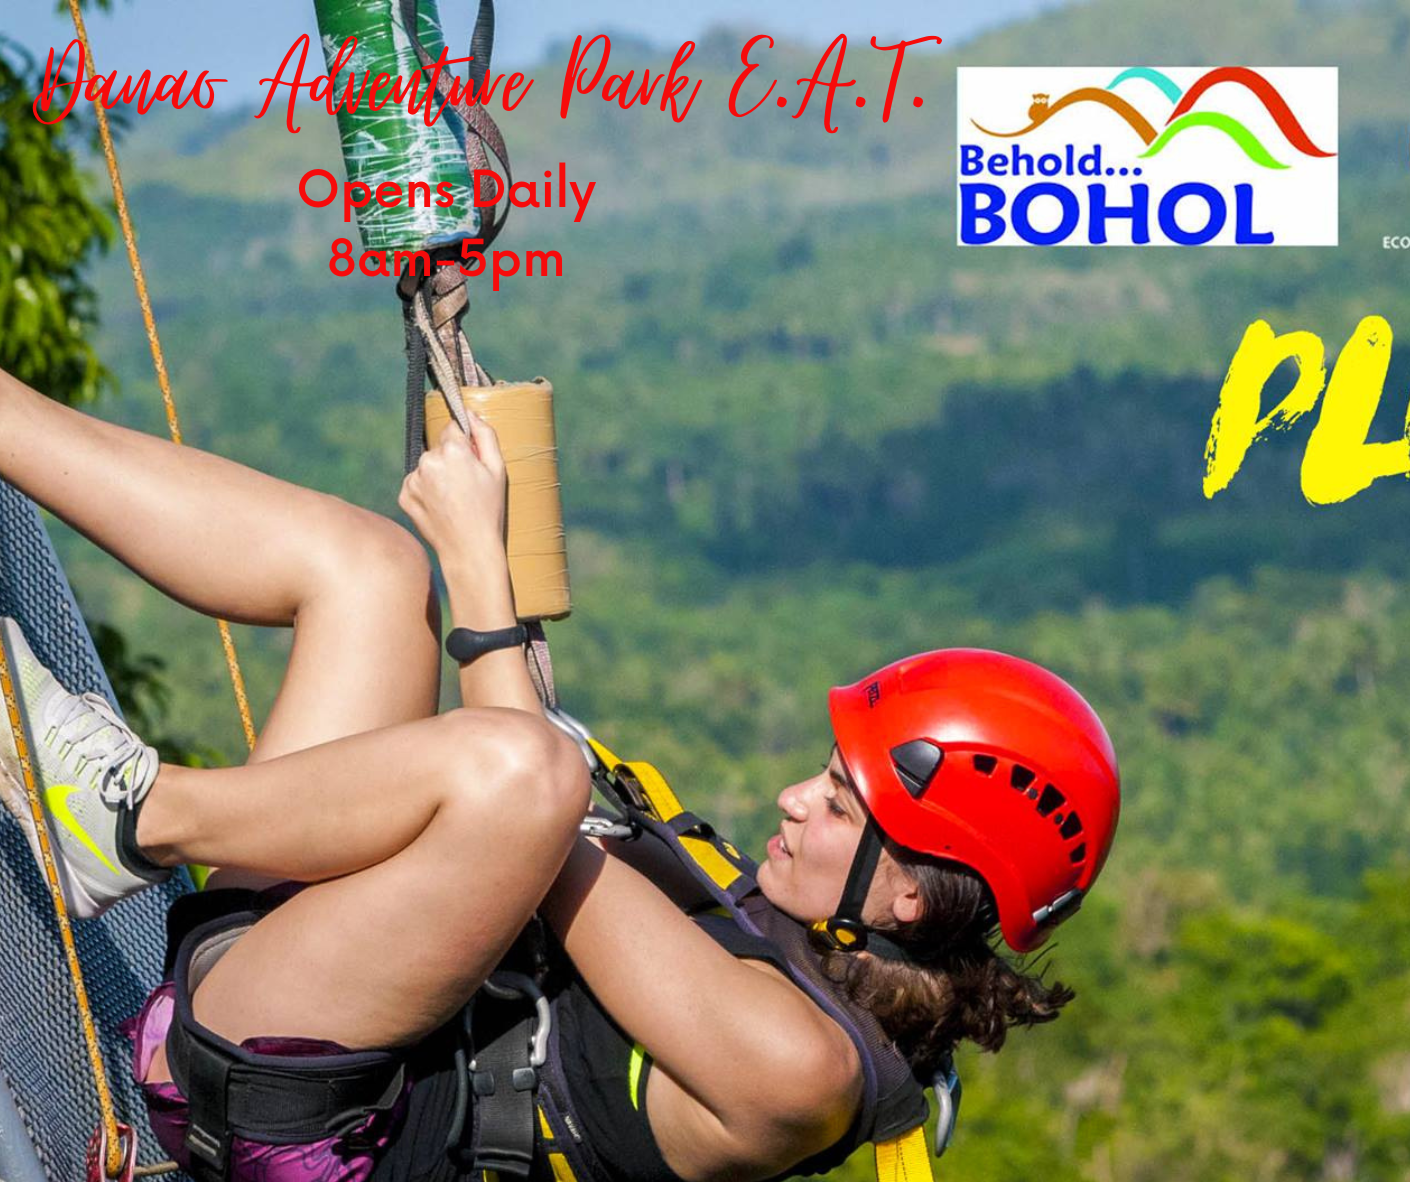 You are currently viewing My Bohol Getaway: An Exciting Adventure to the Danao Adventure Park